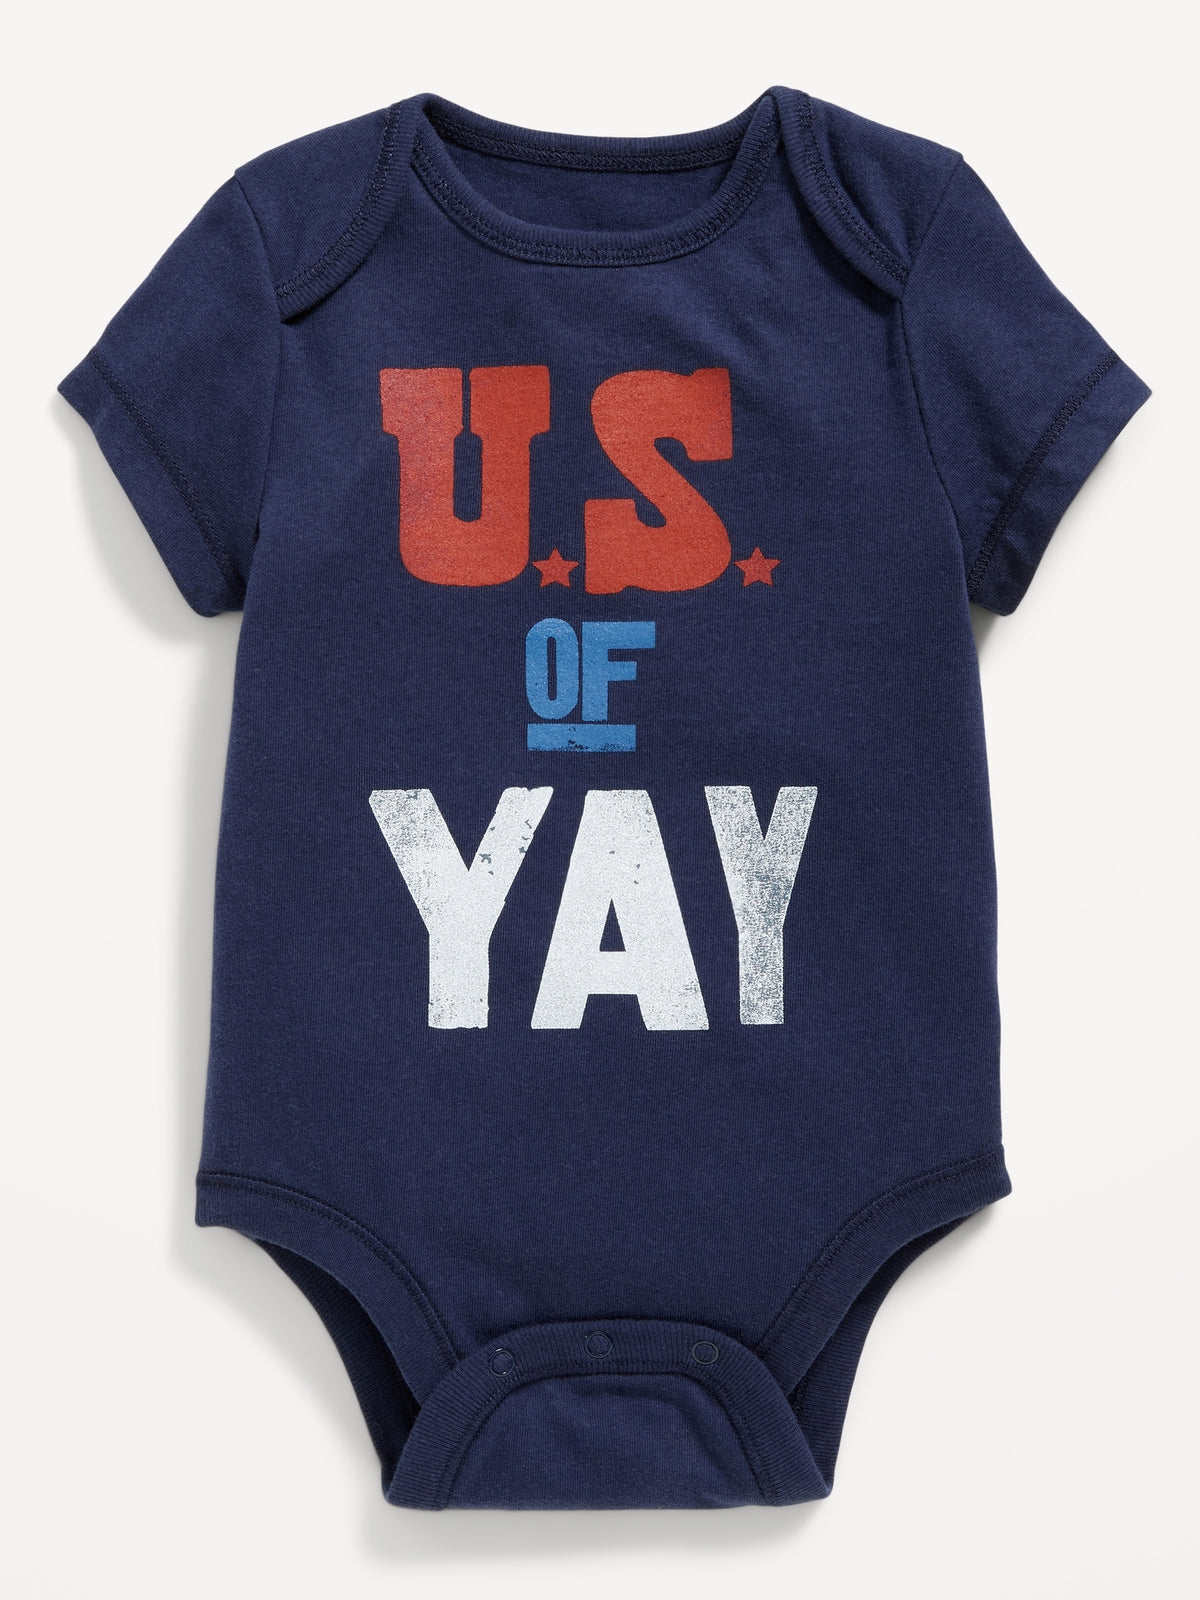 U.S. of Yay (Match the Fam)